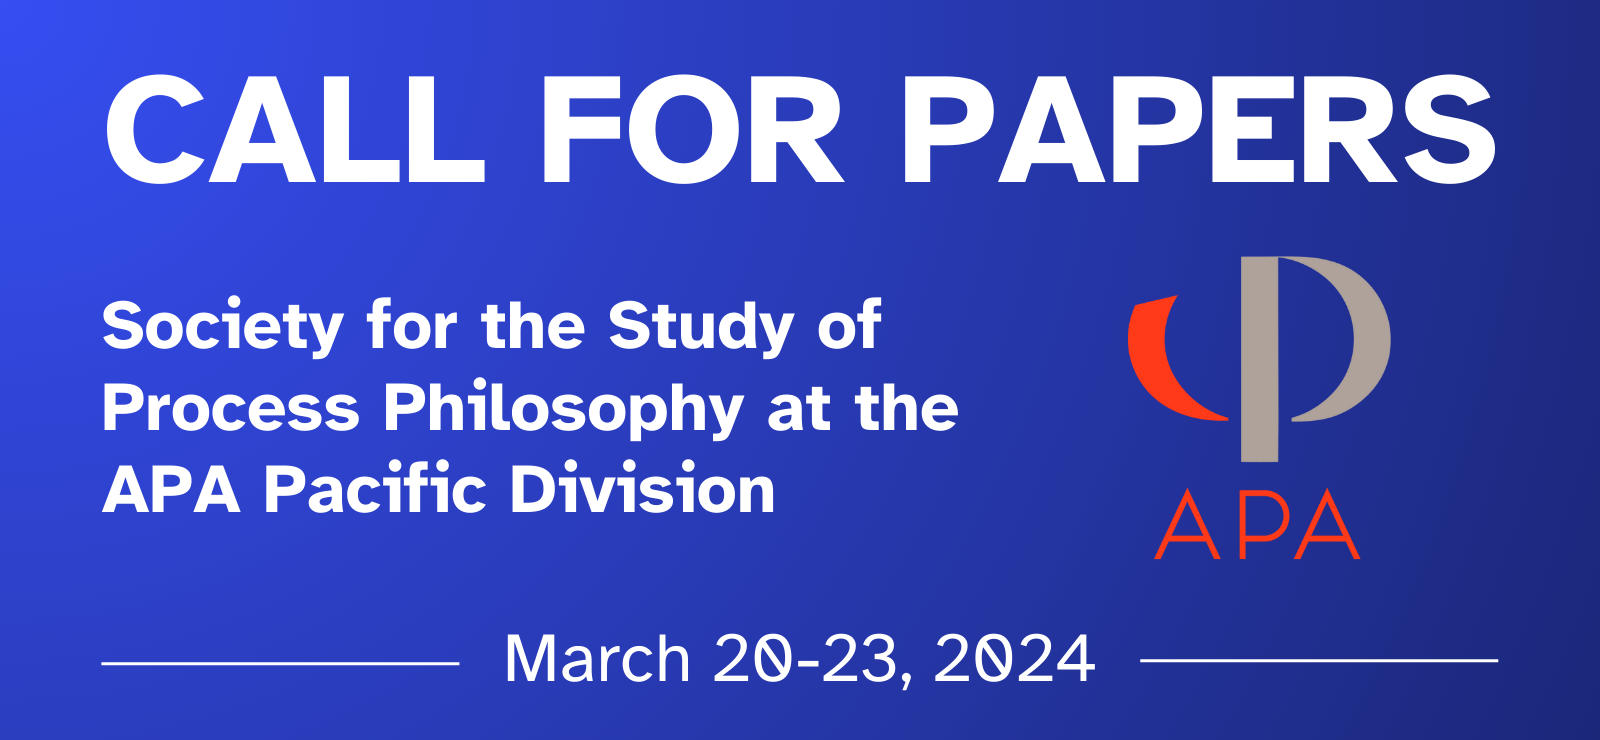 CALL FOR PAPERS Society for the Study of Process Philosophy at the APA Pacific Division